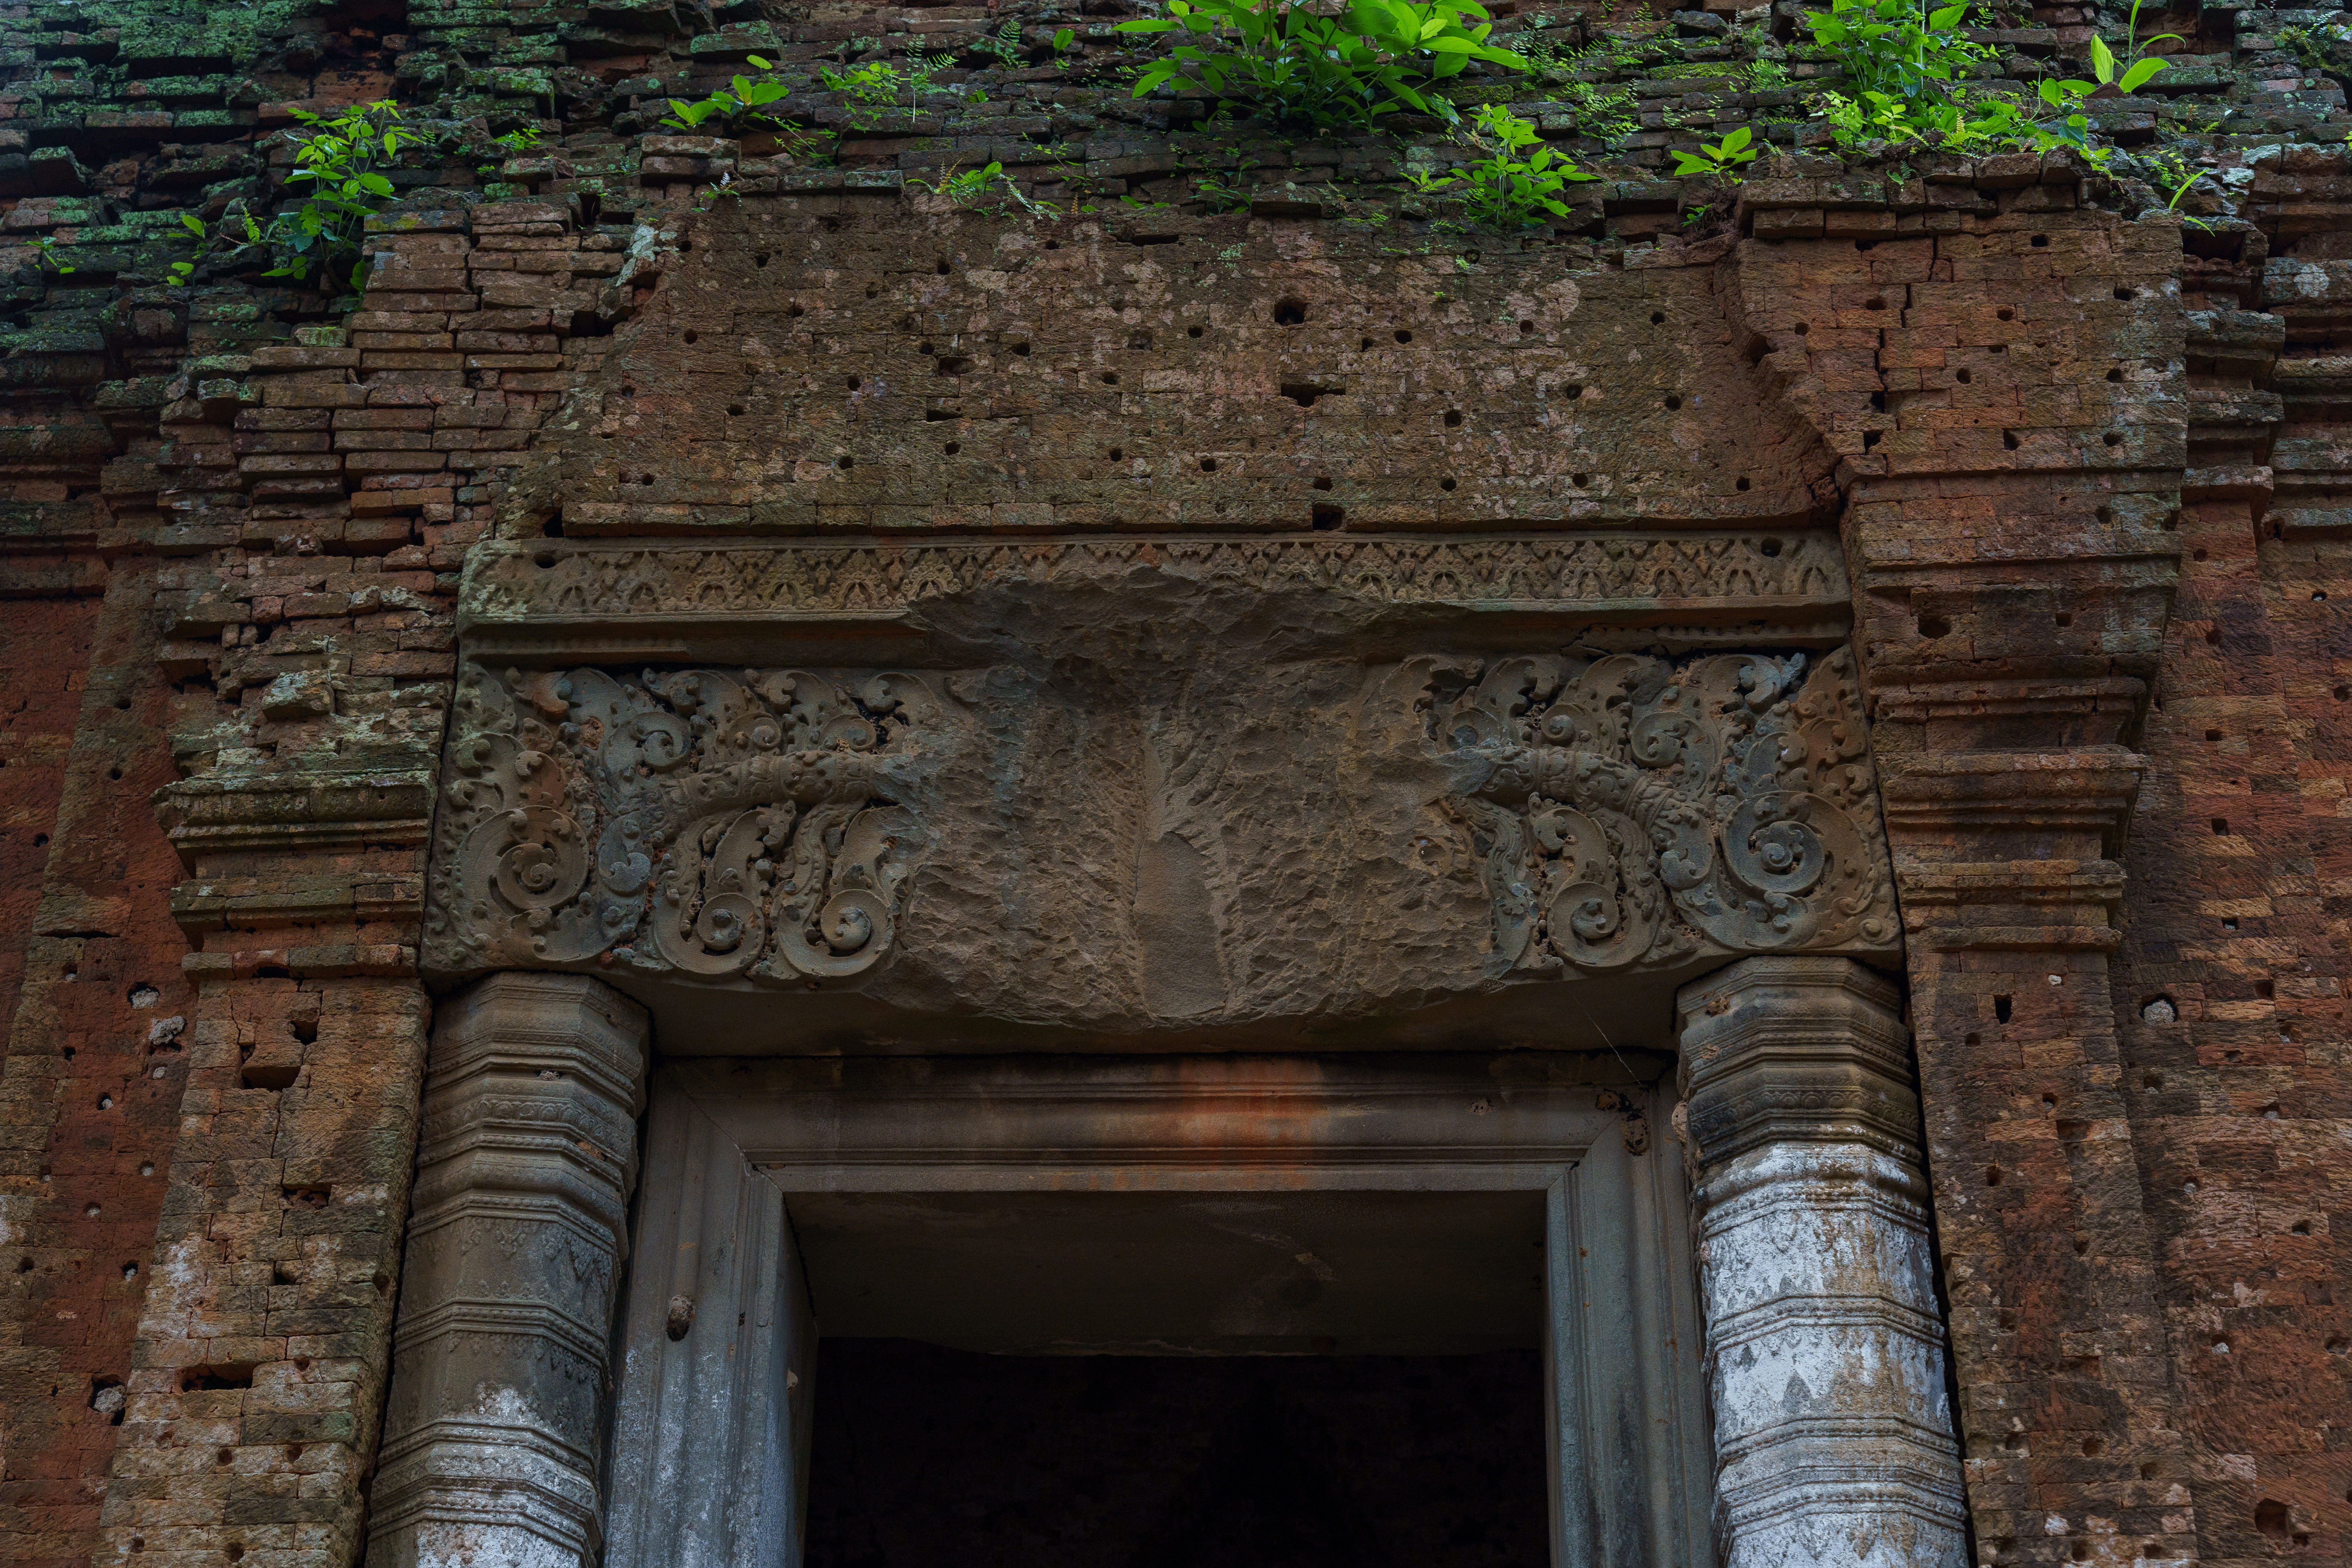 The remains of a bas-relief over a door of one of the temples of Prasat Thom, Koh Ker in Cambodia are seen on Aug. 10, 2022. The complex was one of the most targeted by looters. (Photo by Thomas Cristofoletti/Special to The Denver Post)